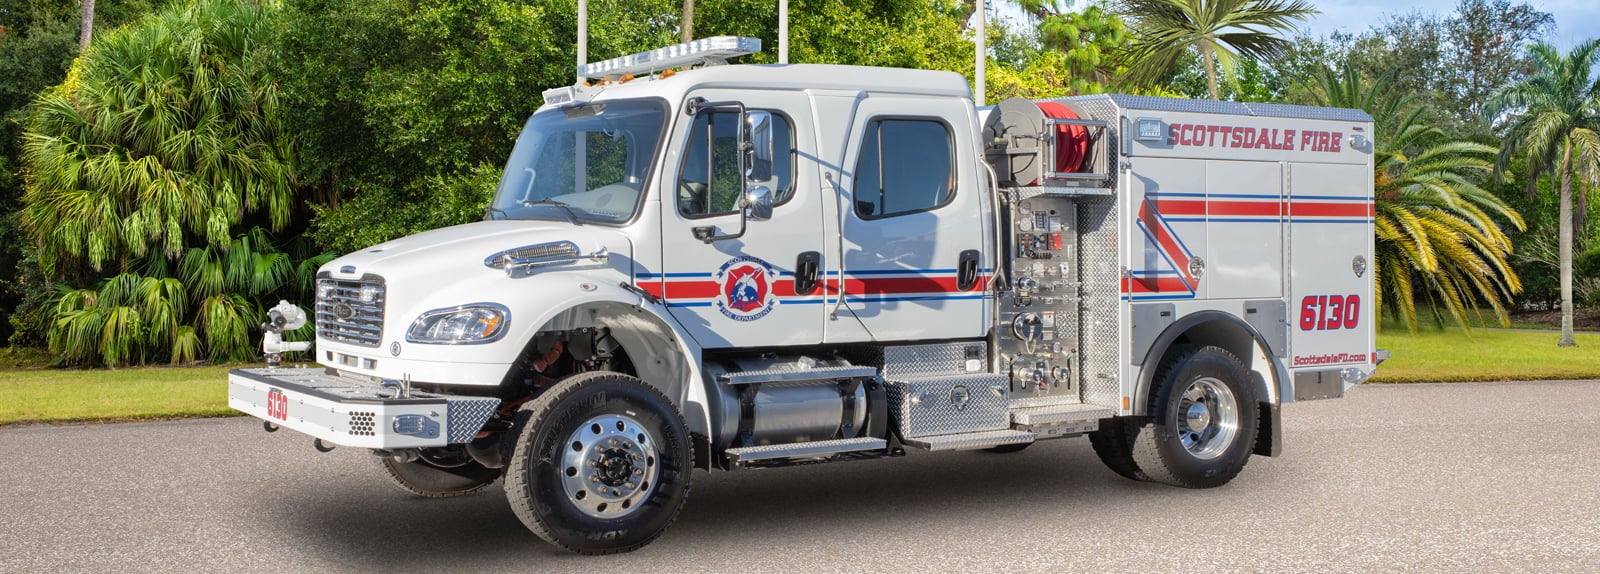 A white type 3 fire truck is parked showing the driver’s side detail with trees in the background. 